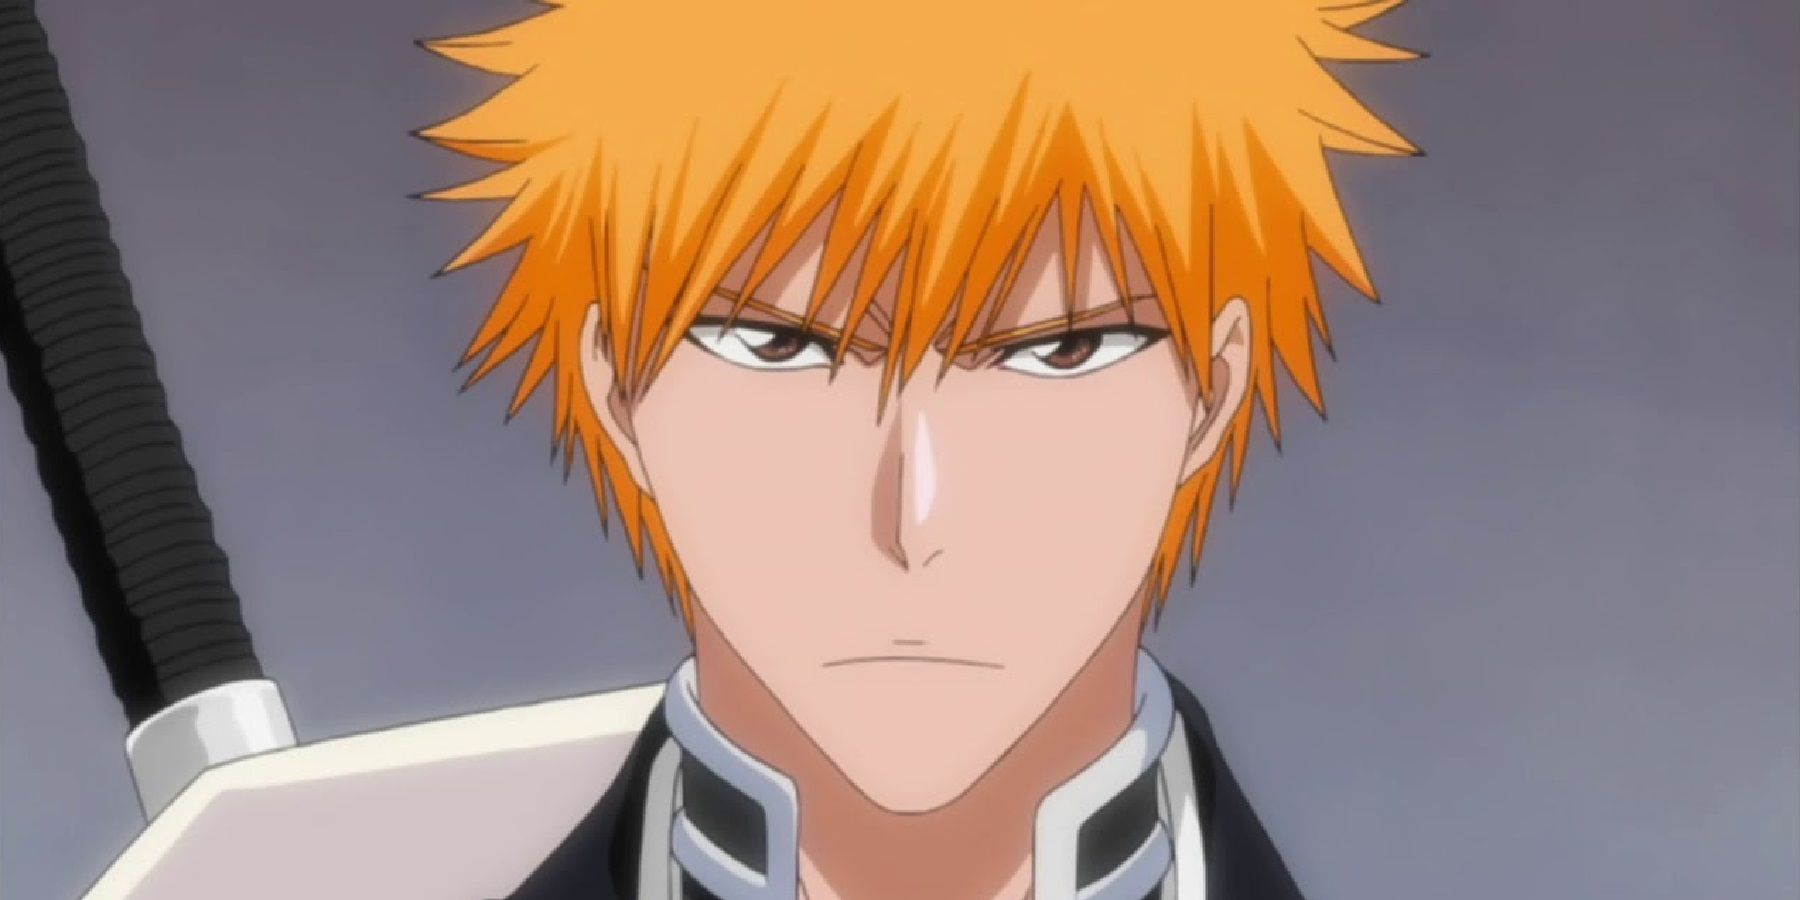 Elden Ring Player Makes a Build Based on Ichigo from Bleach